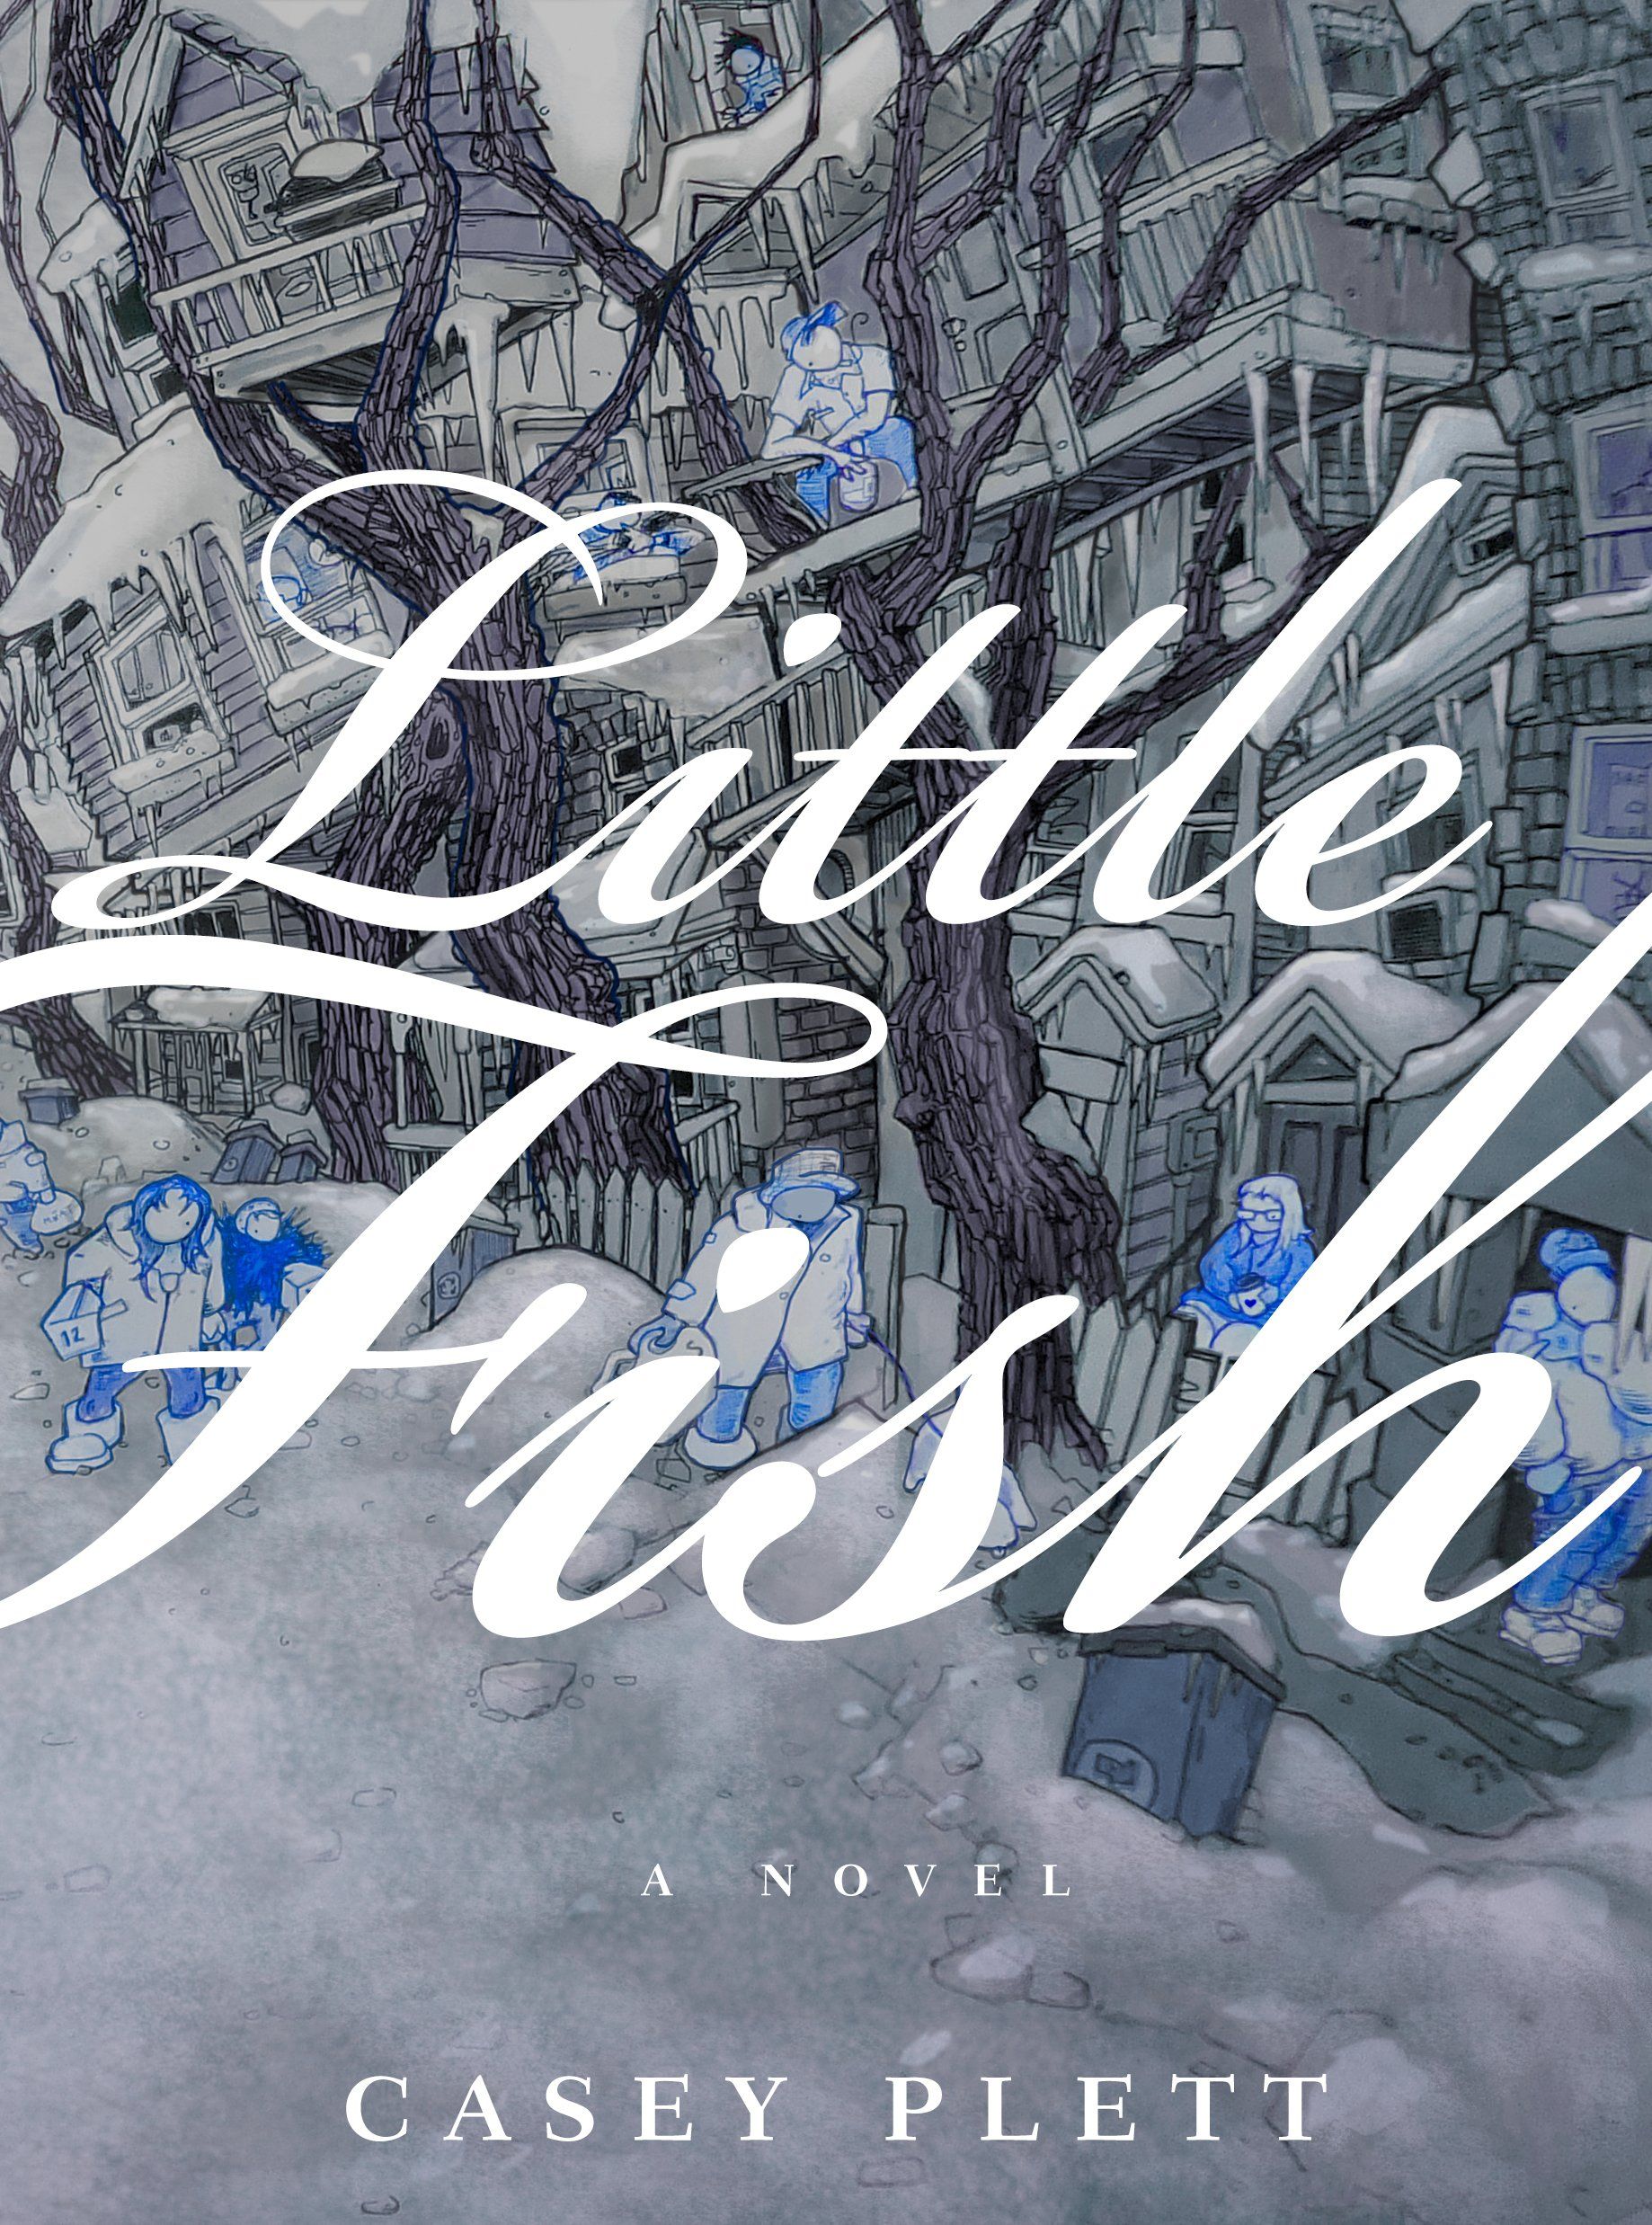 Cover of Little Fish